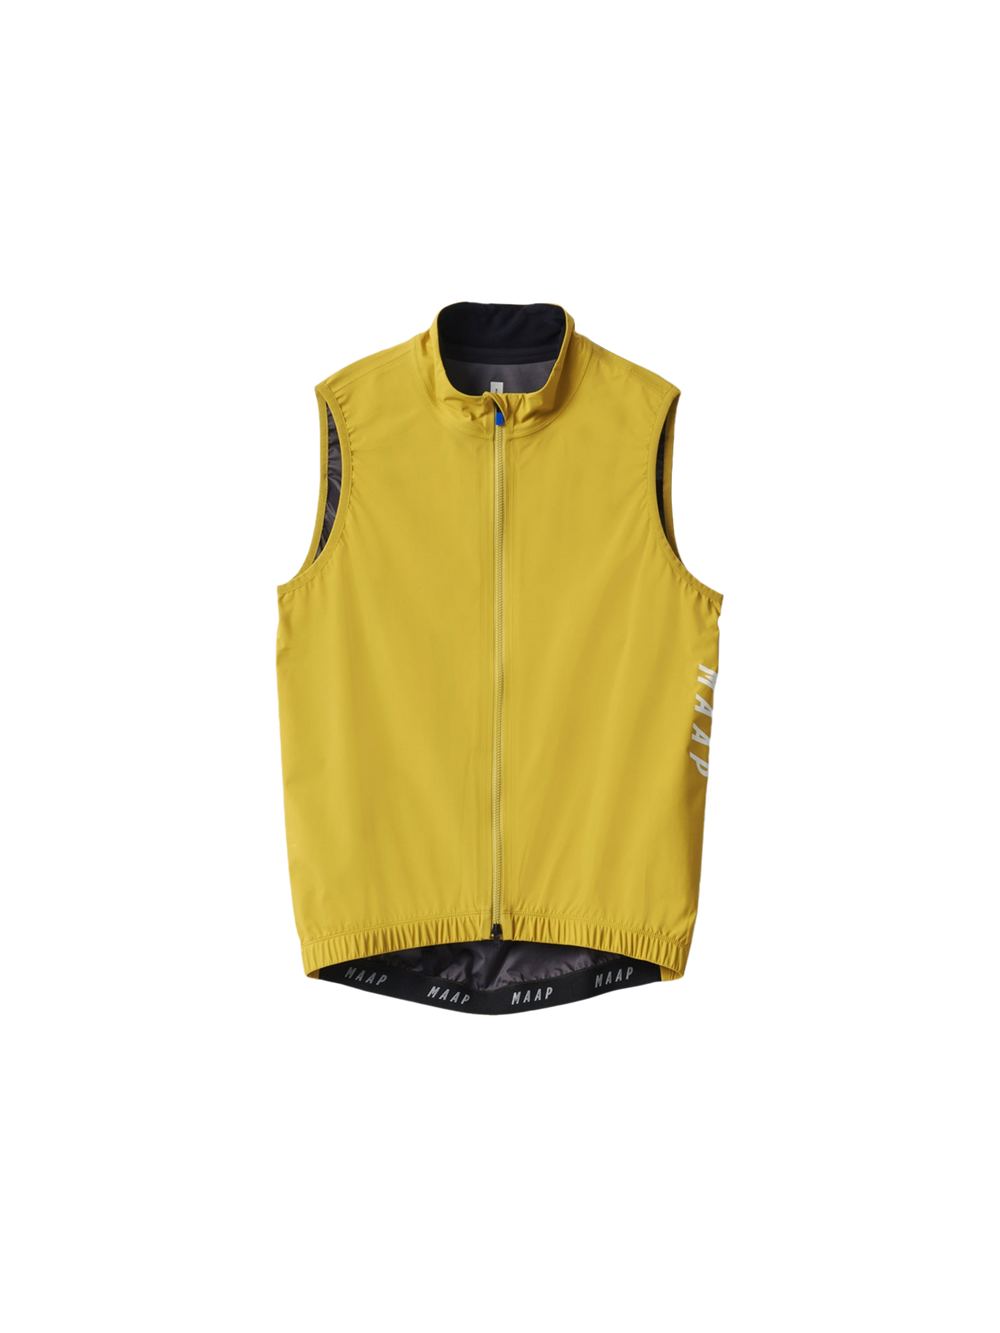 Product Image for Prime Vest